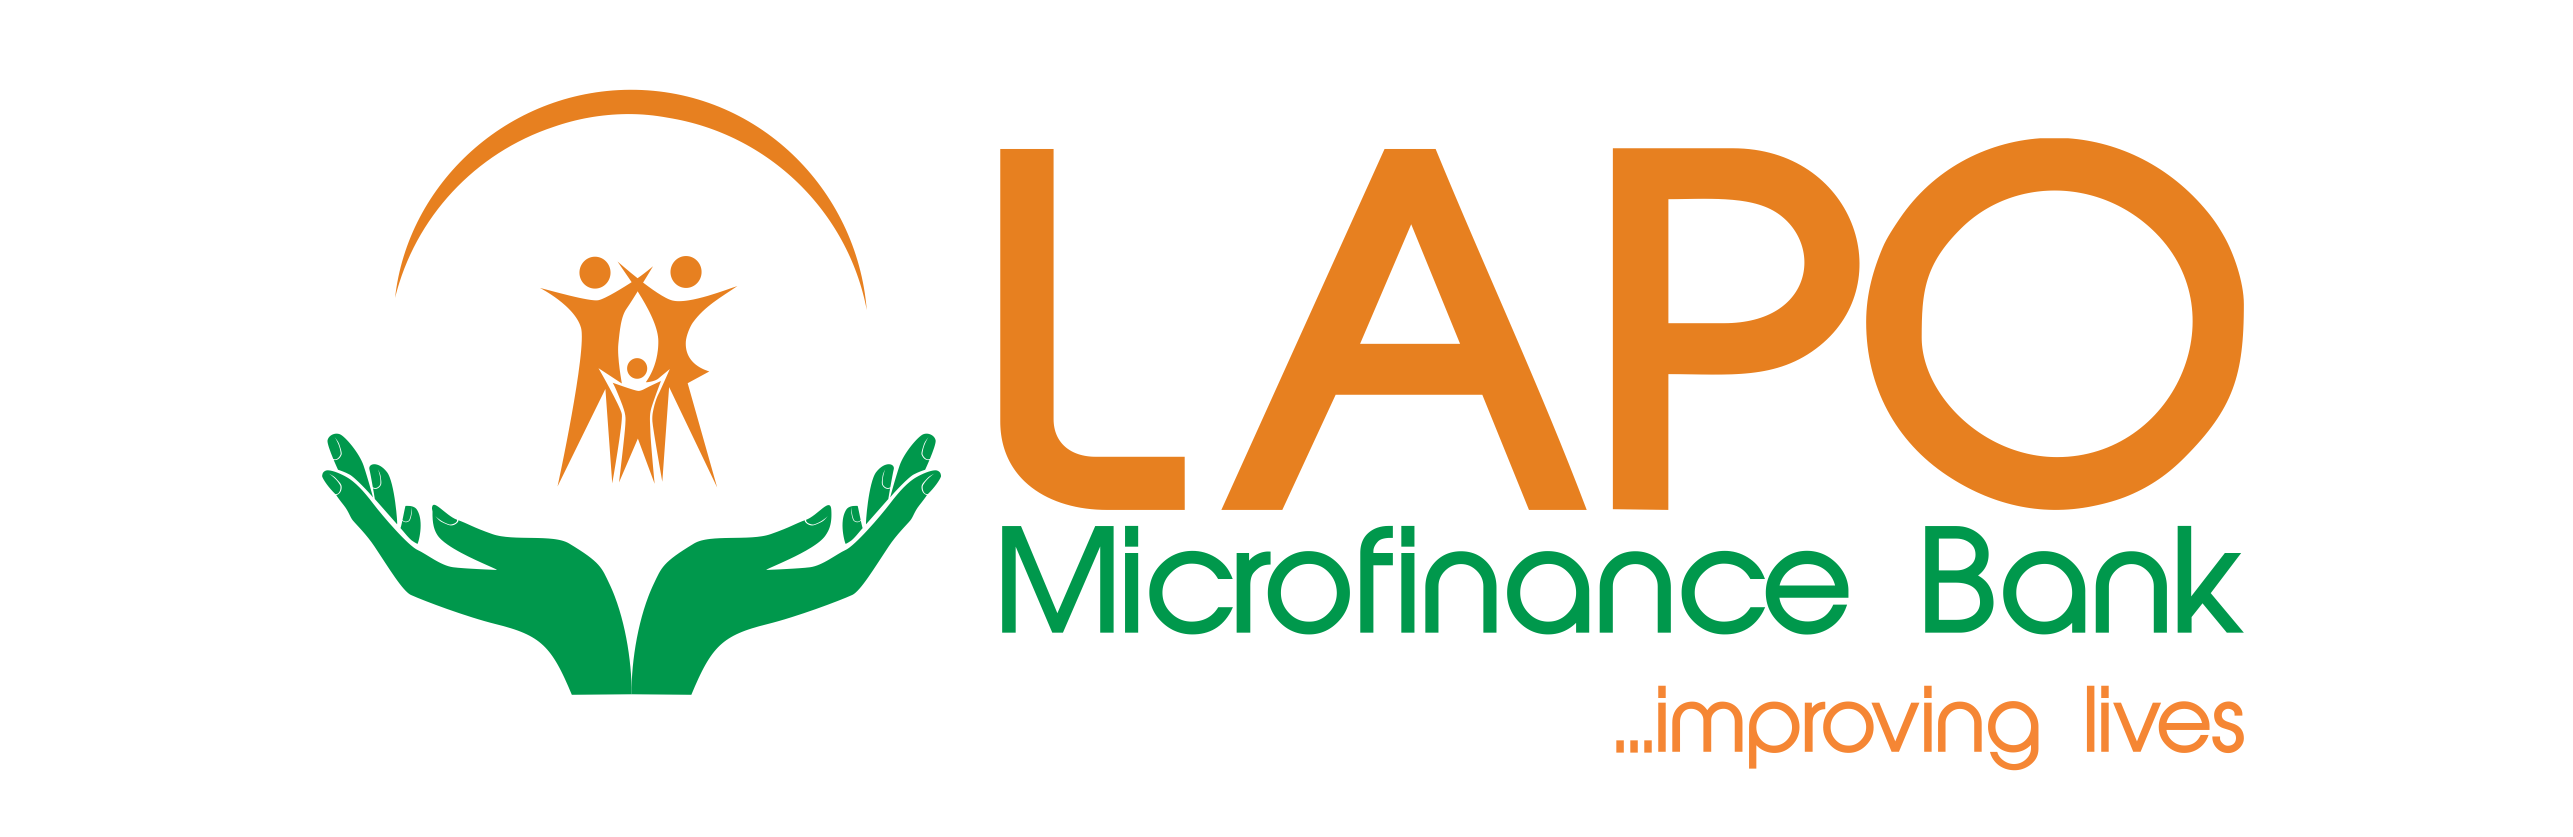 How To Apply For Lapo Microfinance Loan